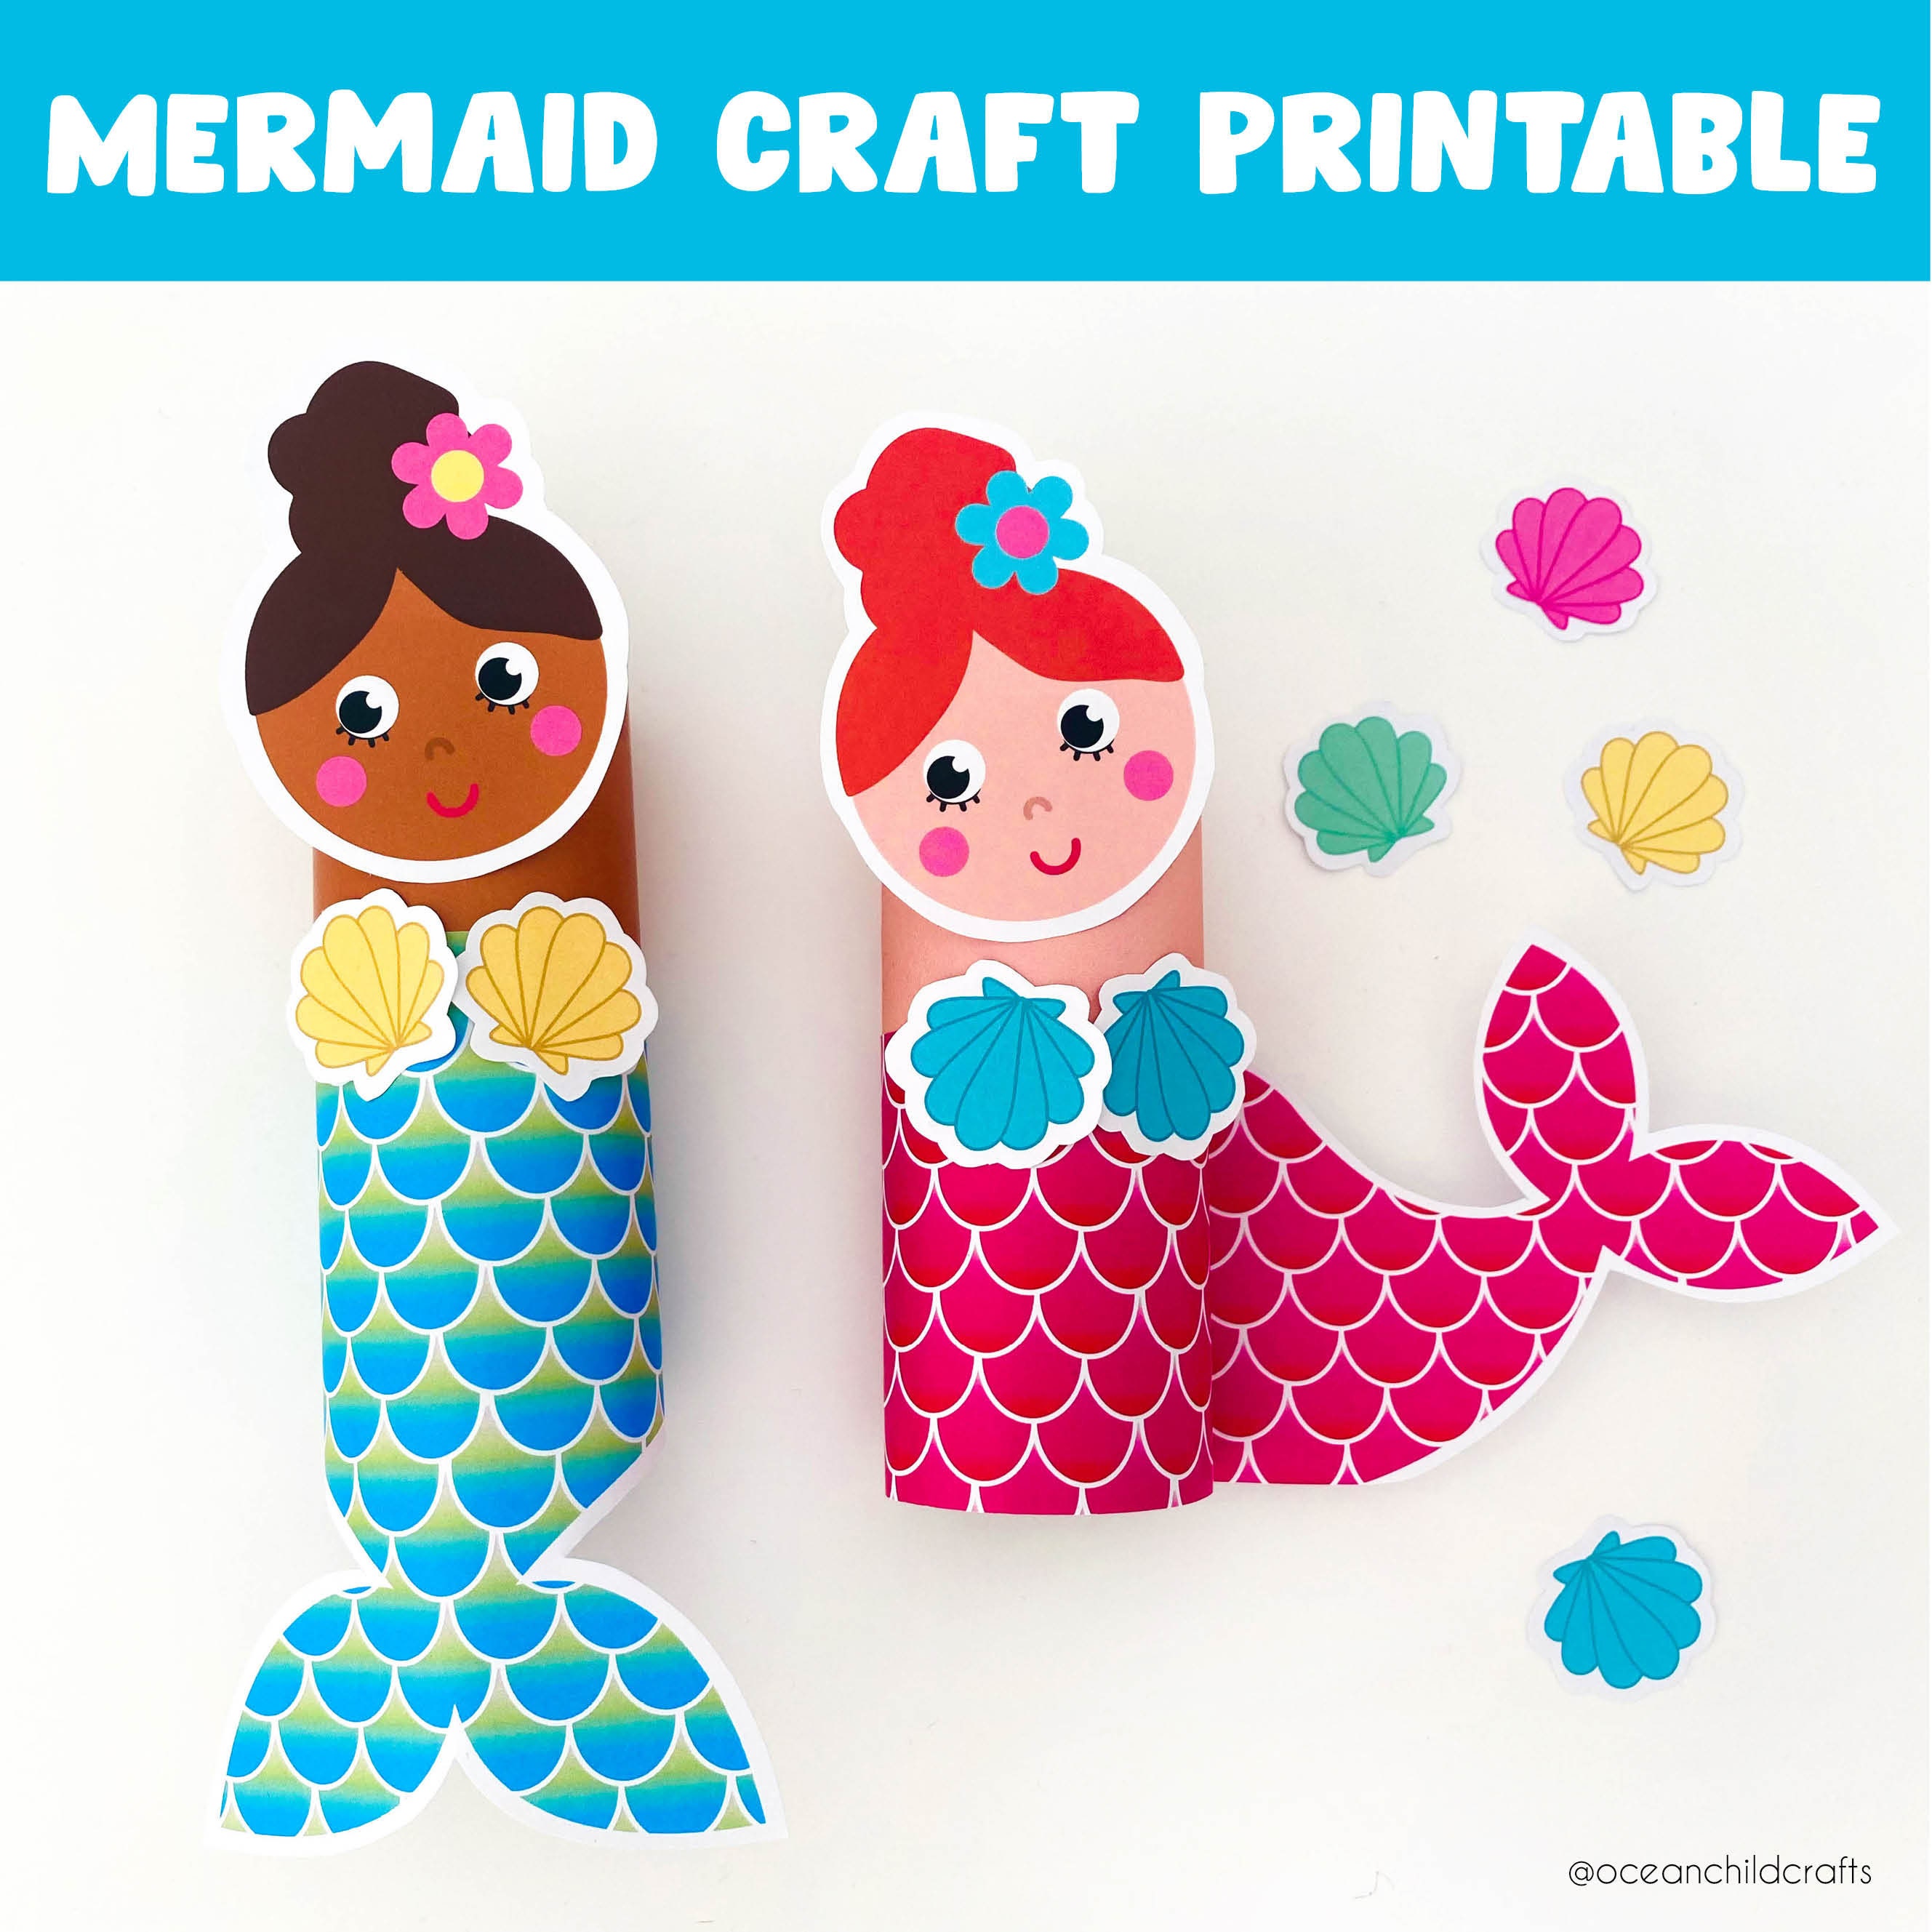 17 Amazing Mermaid Crafts for Kids · The Inspiration Edit